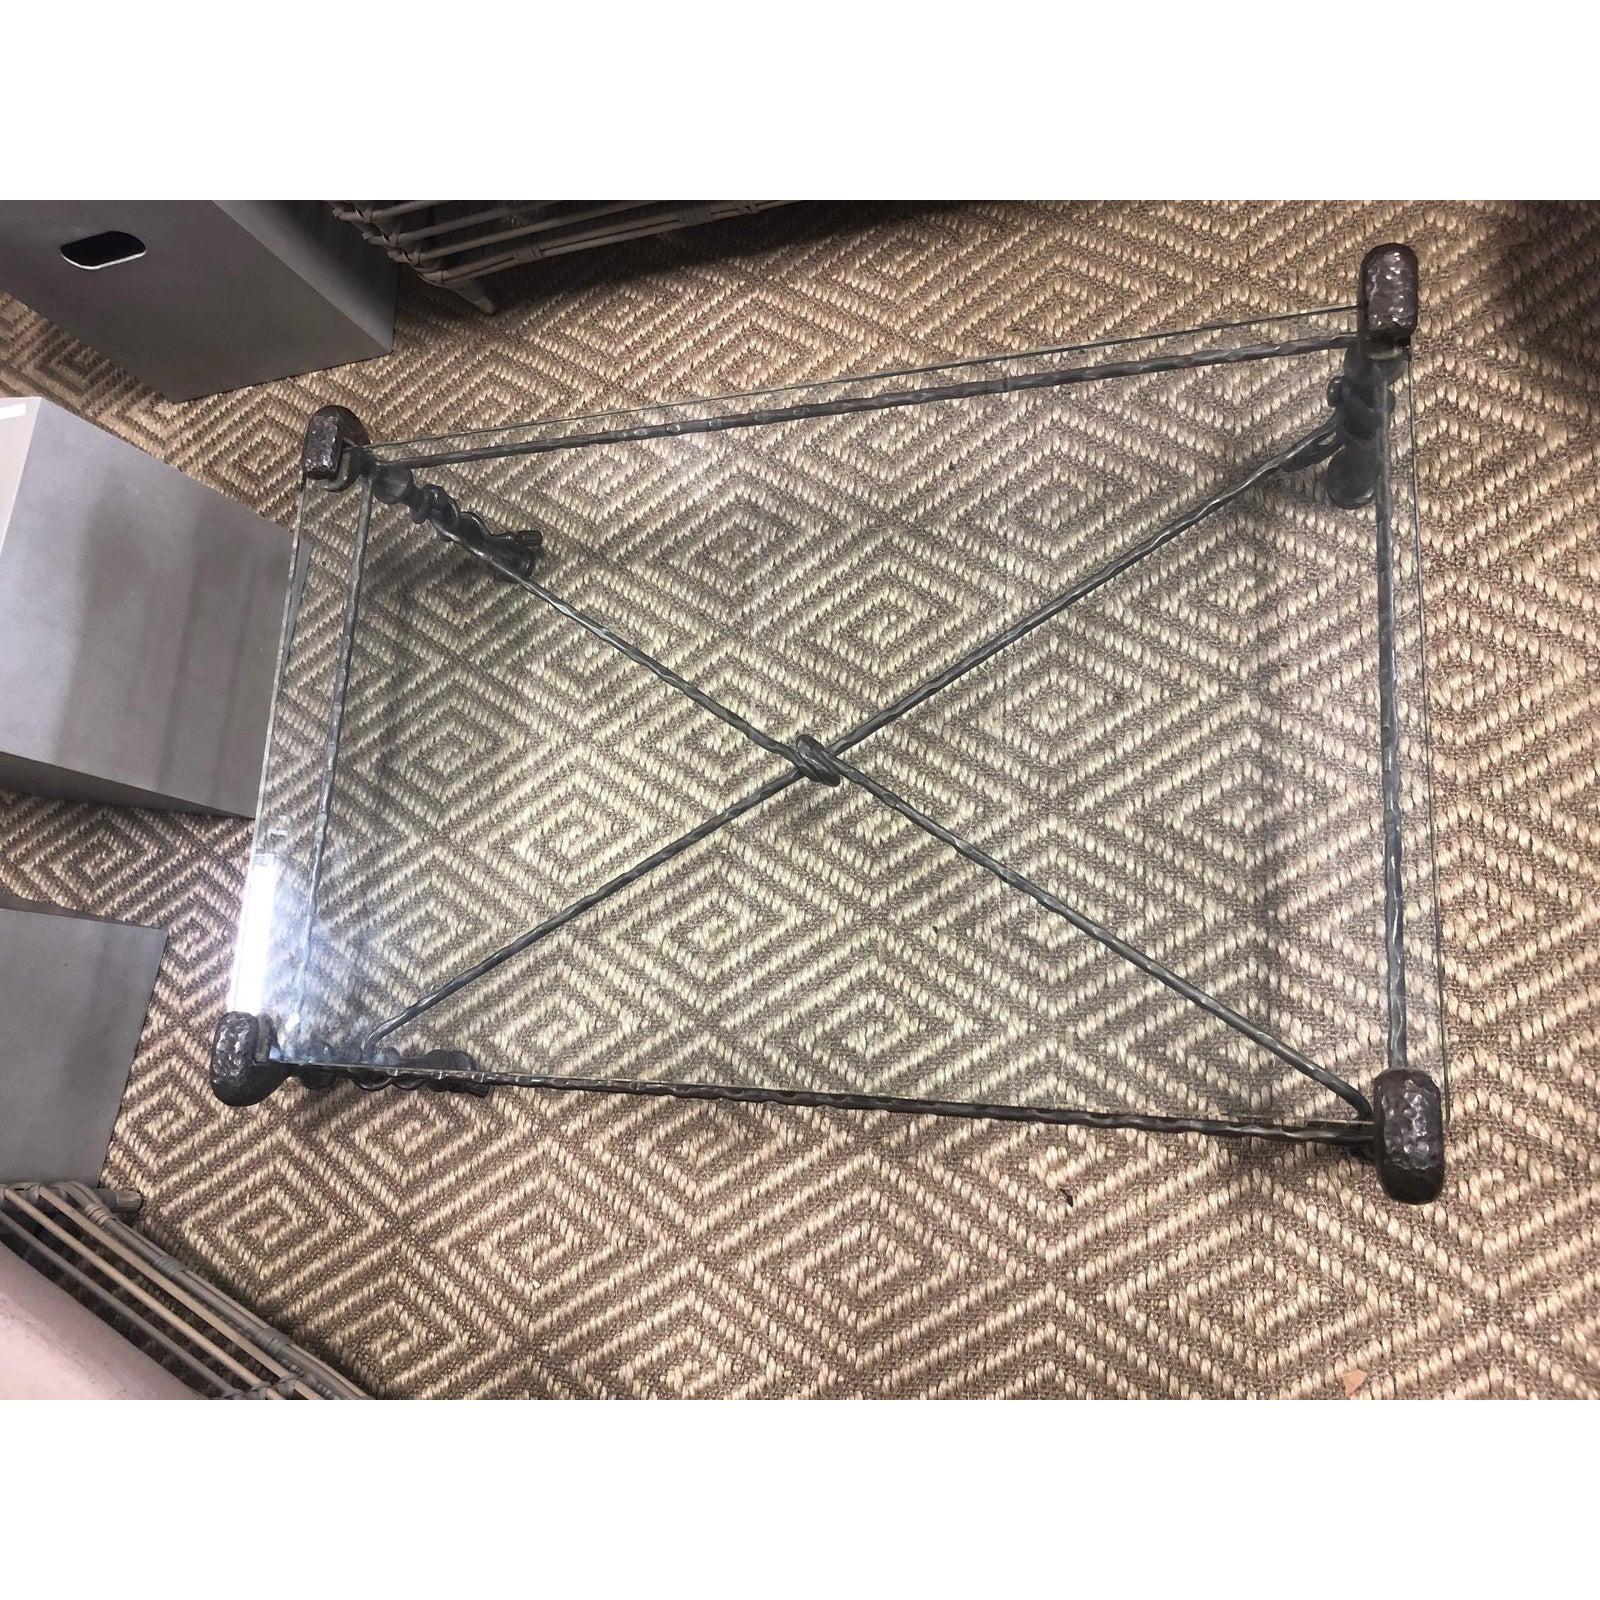 Beautiful glass top Giacometti style coffee table with criss cross hammered iron base, thick rectangular glass, and both a rustic quality and a refined sense of scale and design that makes this a very versatile piece.